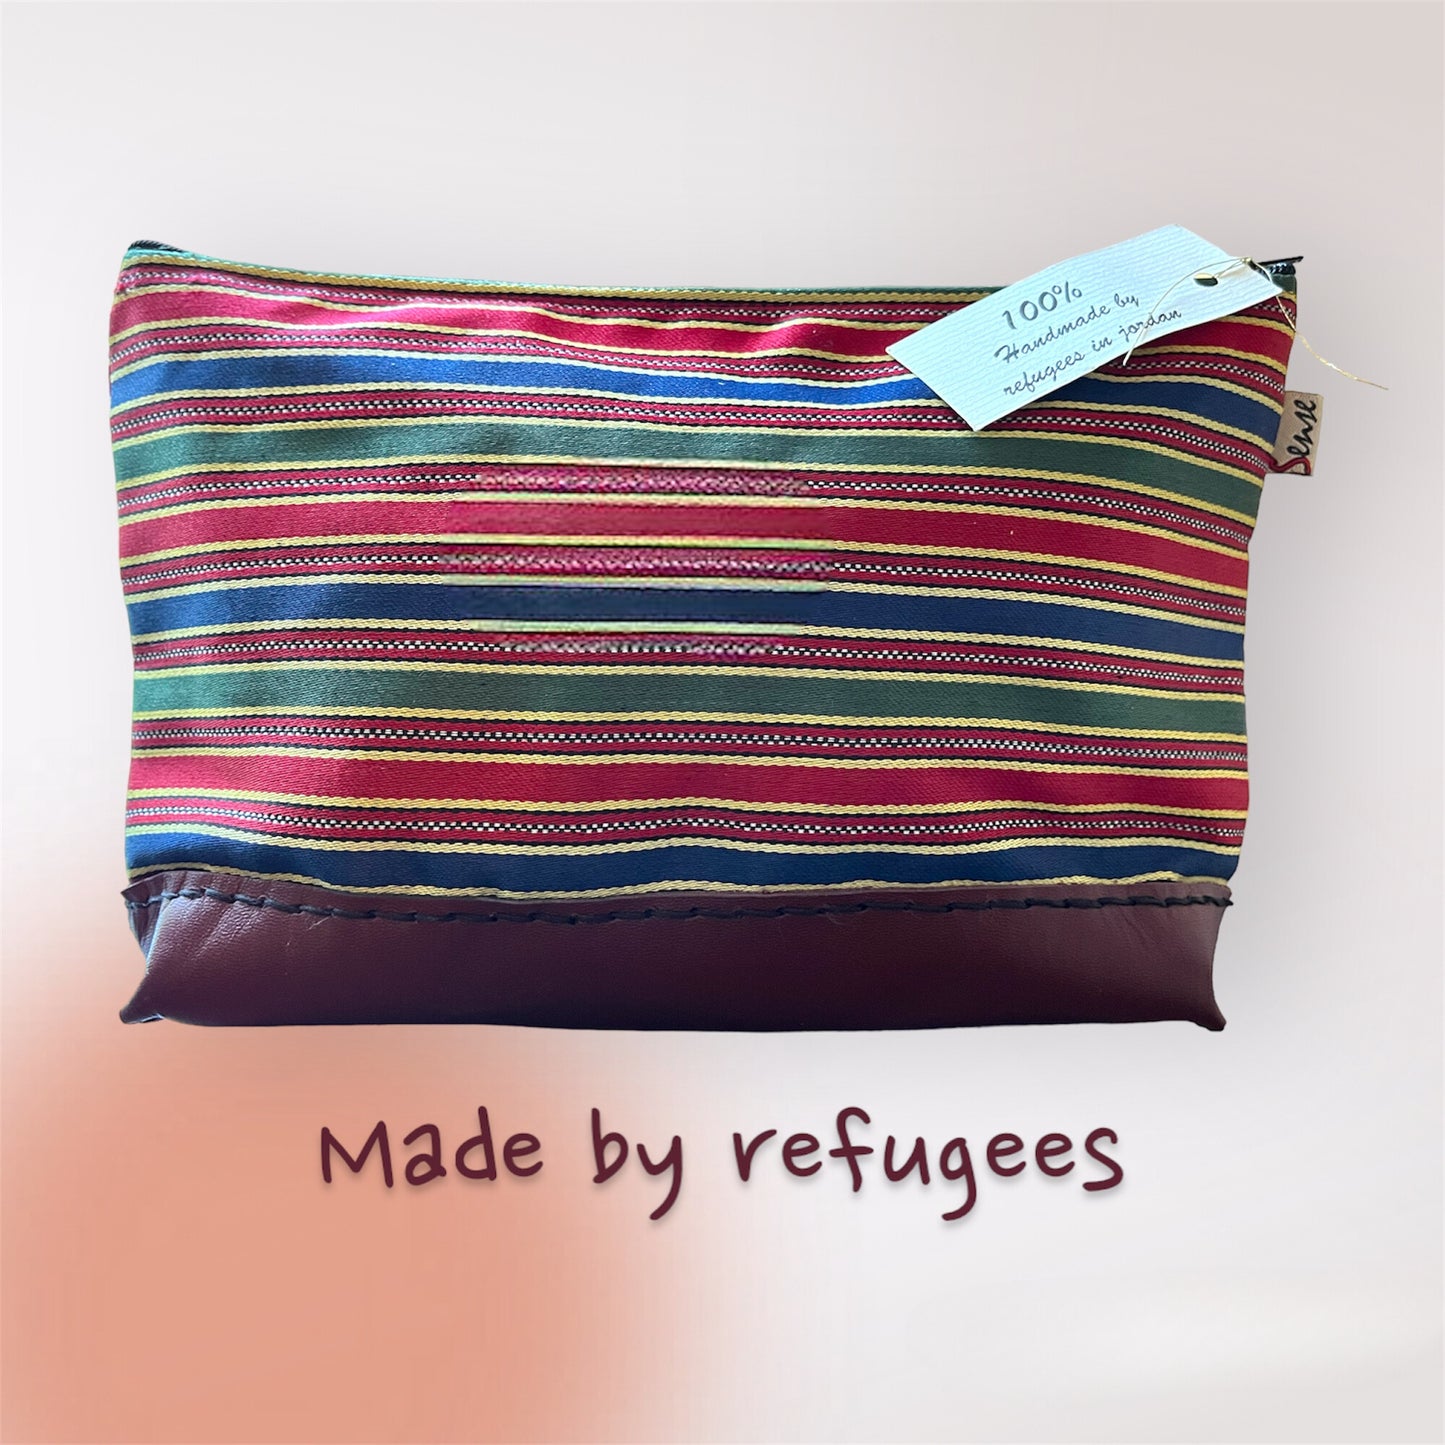 Artisanal Zippered Clutch - Crafted by Refugees in Jordan